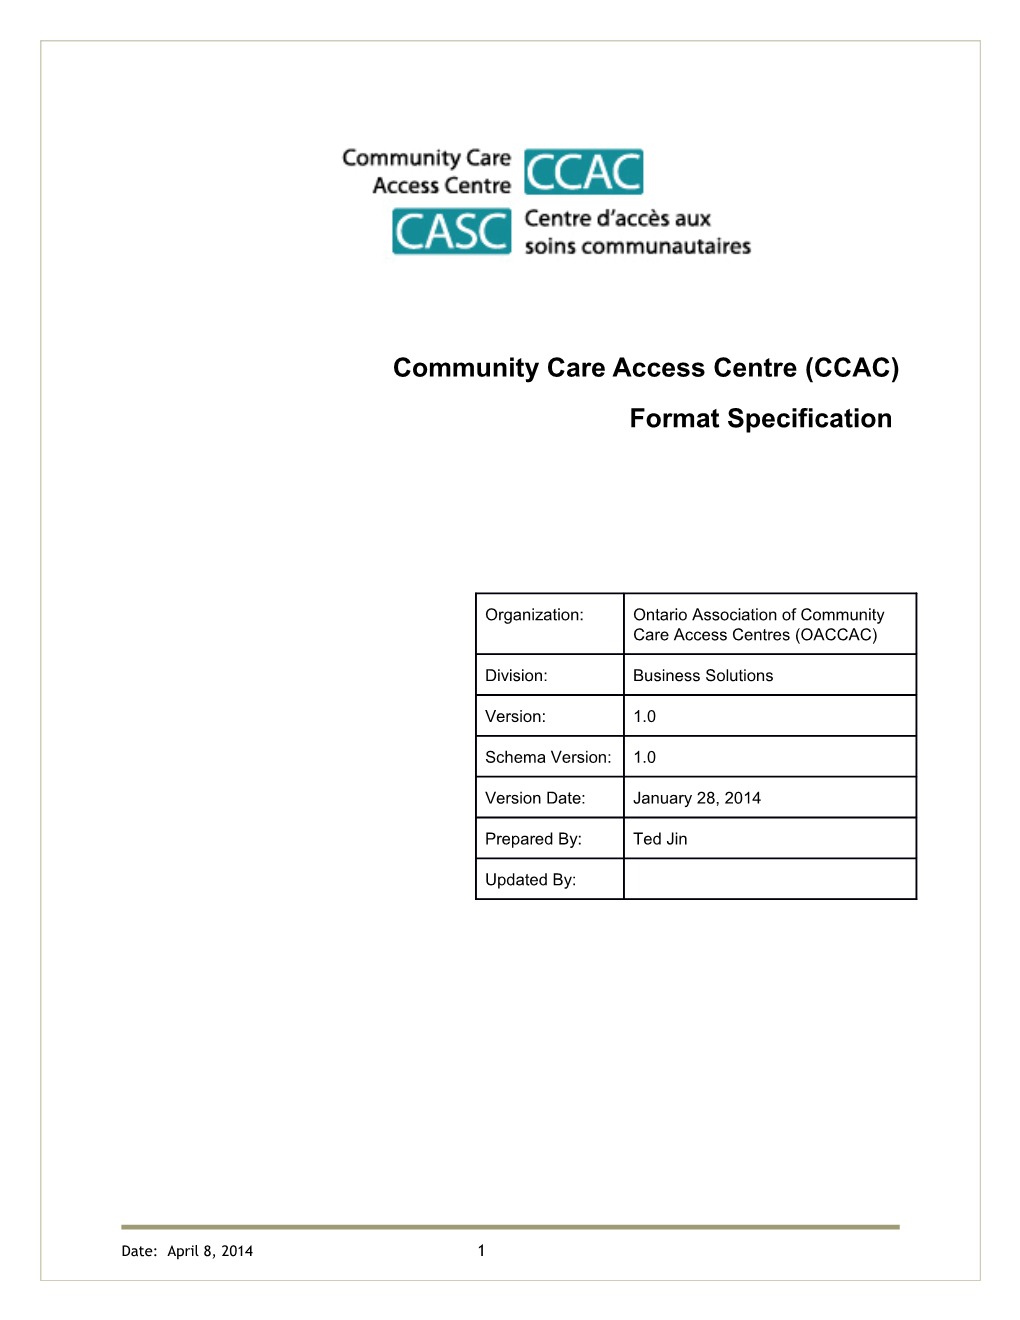 Get CCAC Depot Request Response Format Specification